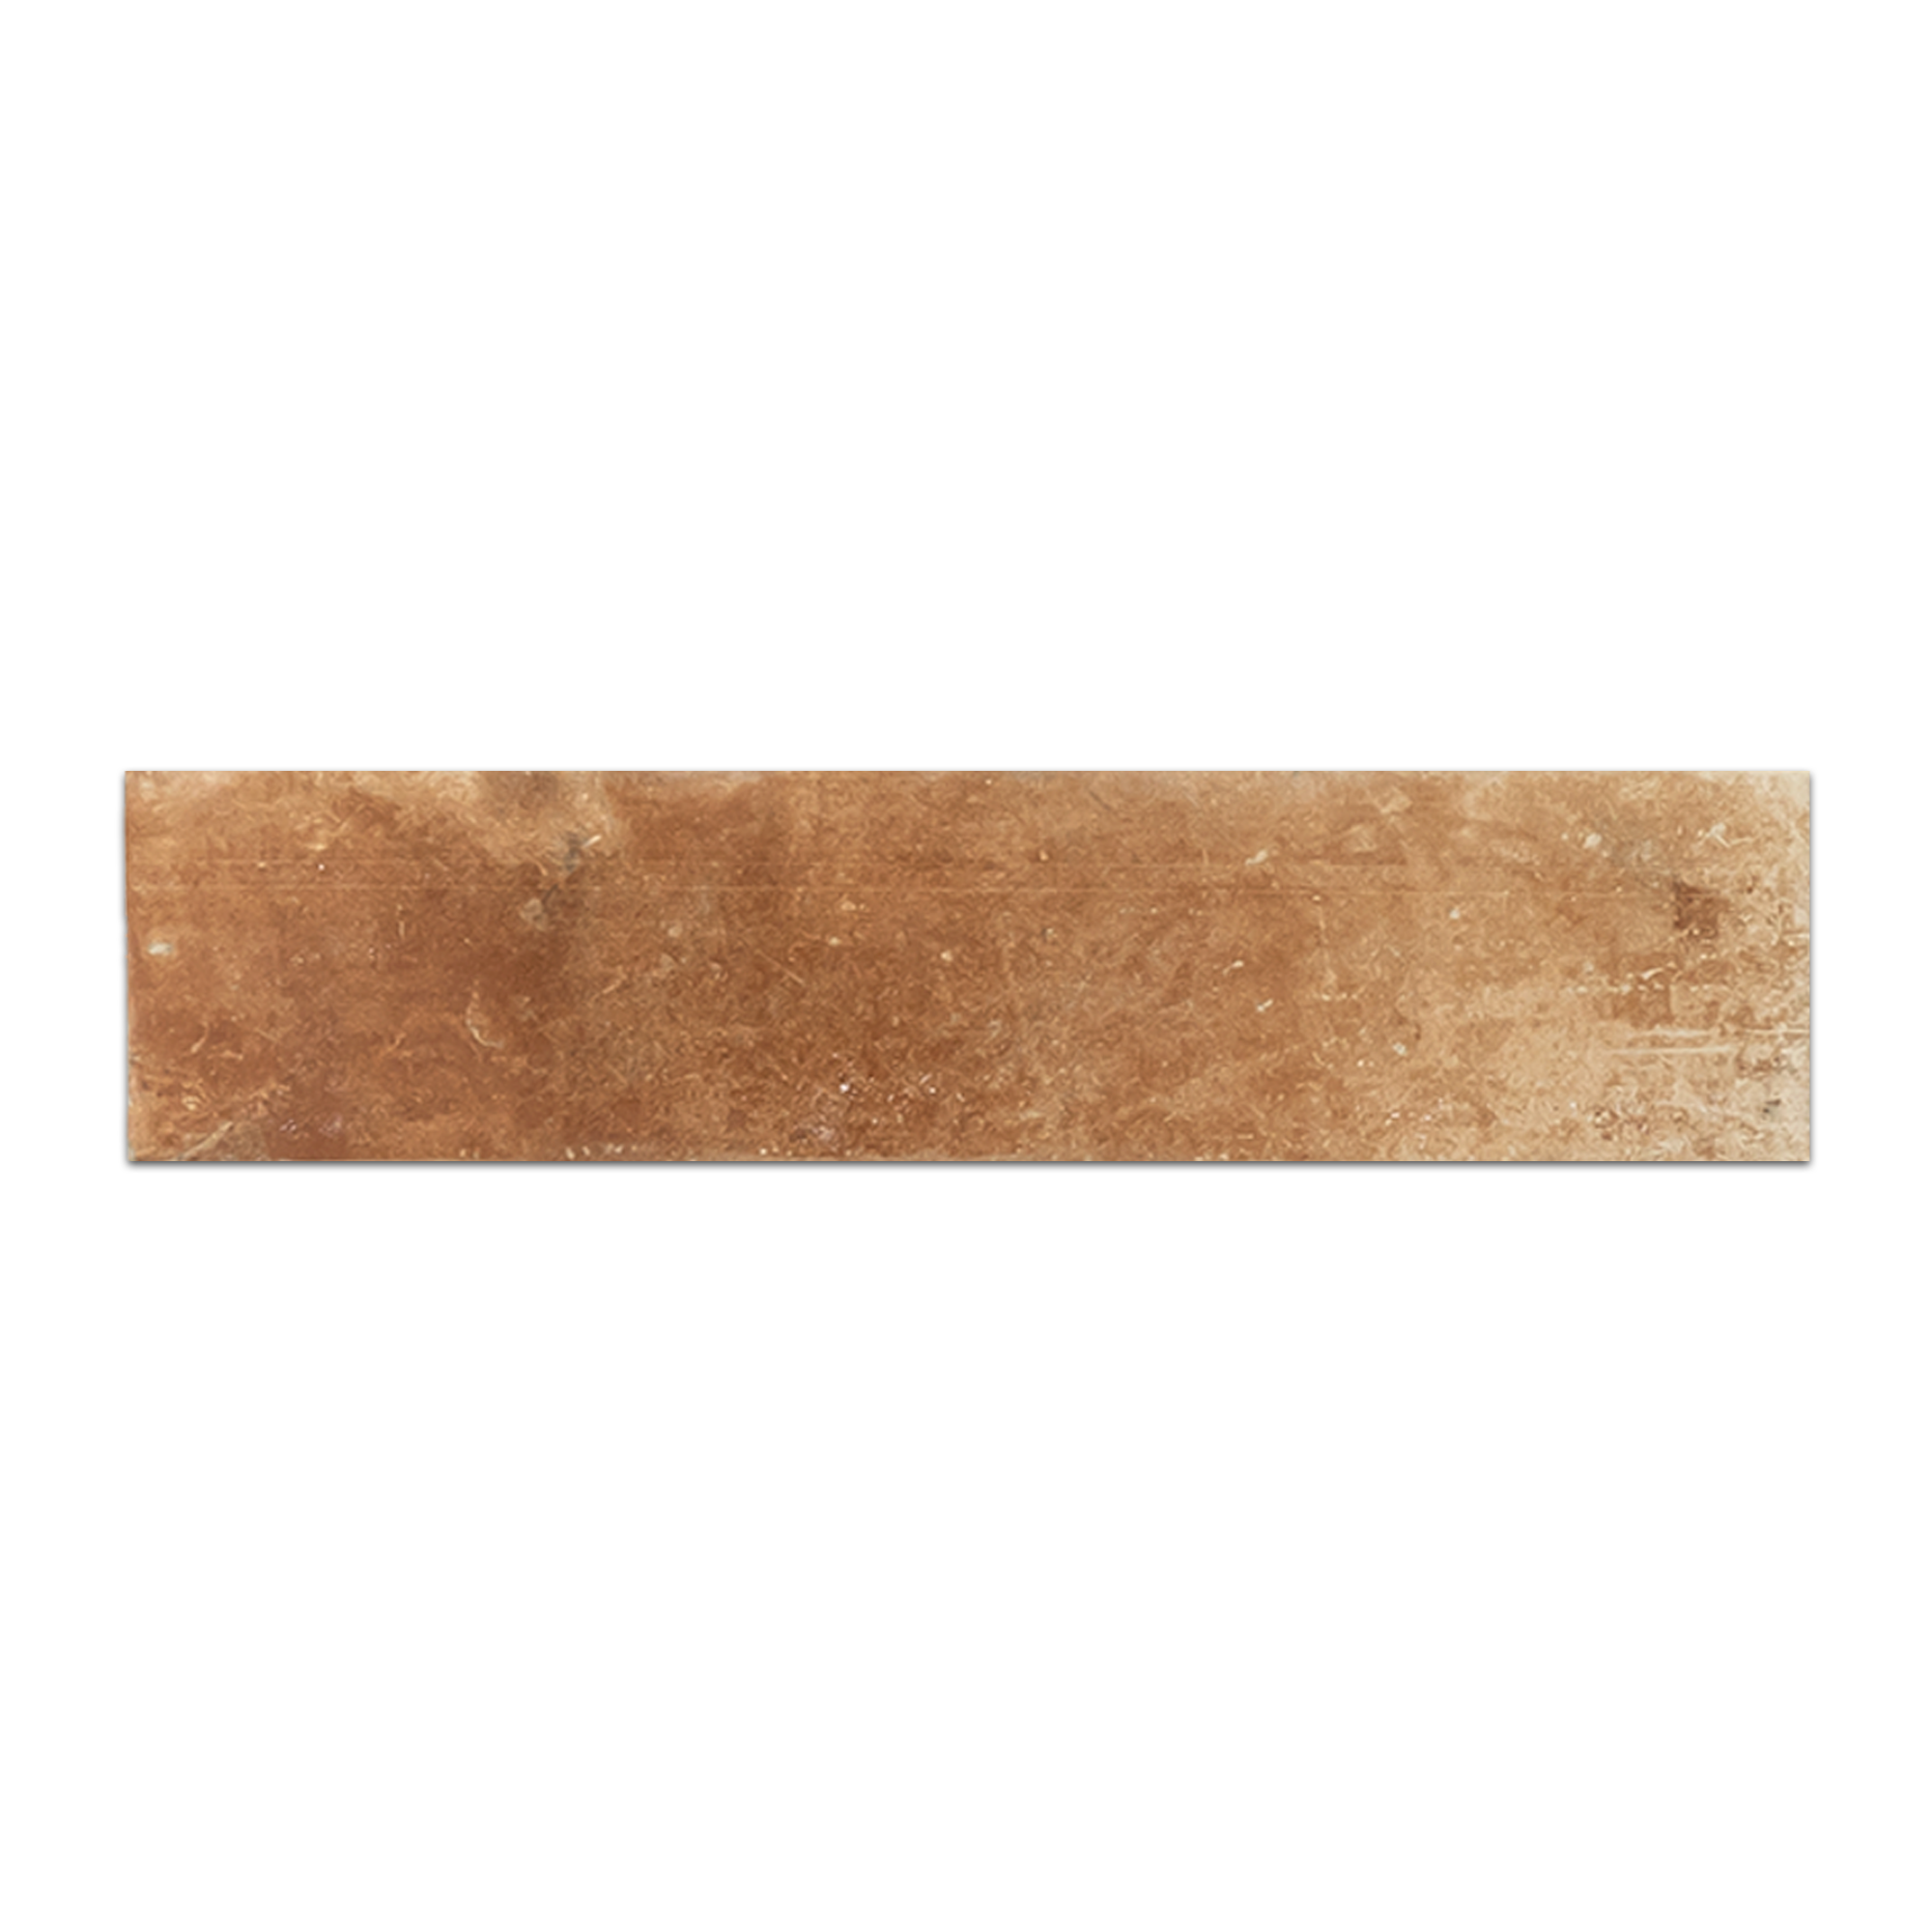 Elon Boston Brick North Porcelain Rectangle Field Tile 2.5x10x0.375 Natural Pressed BC125 Surface Group International Product